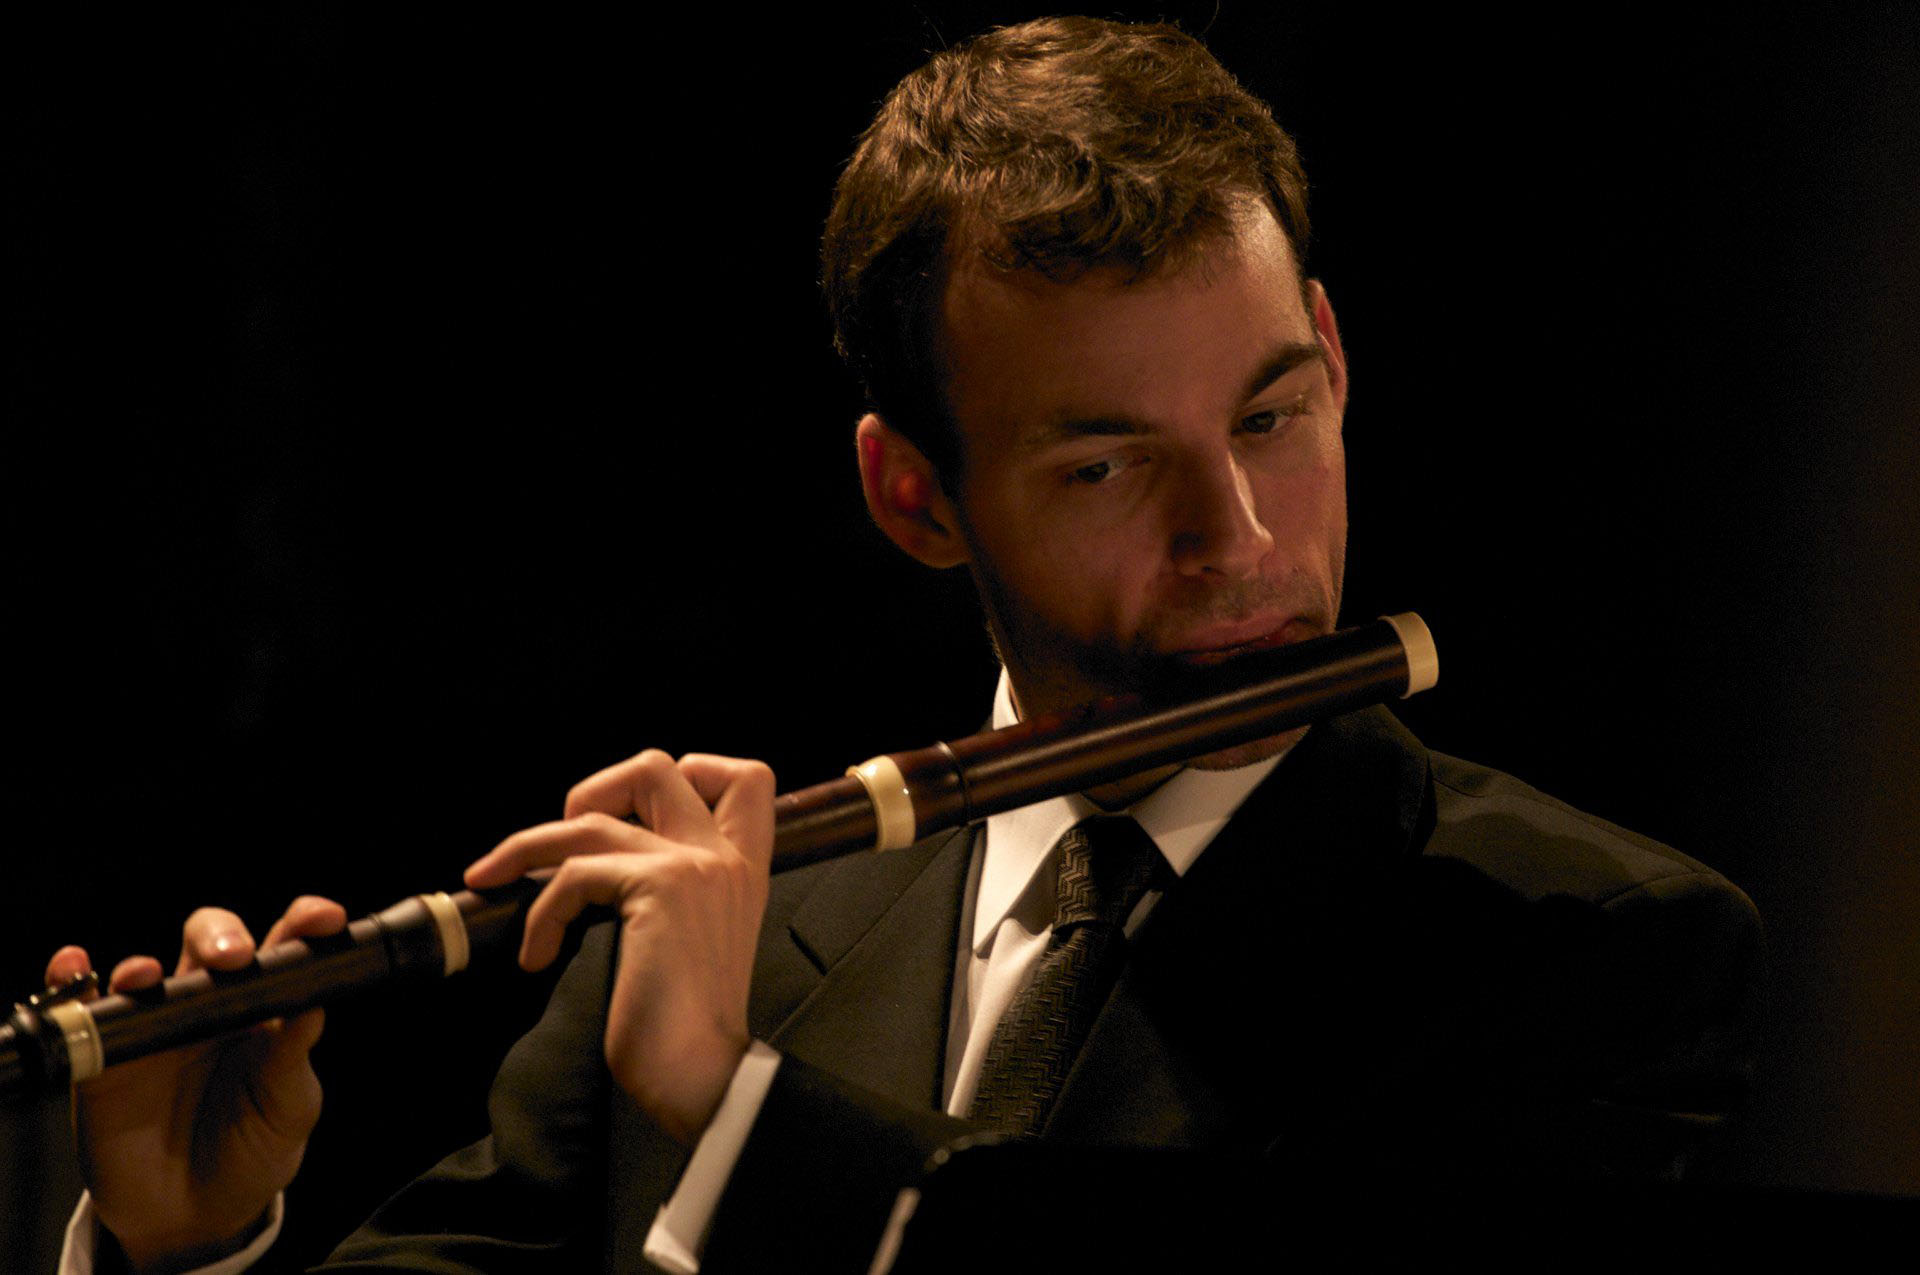 A man wearing black performing on a baroque flute